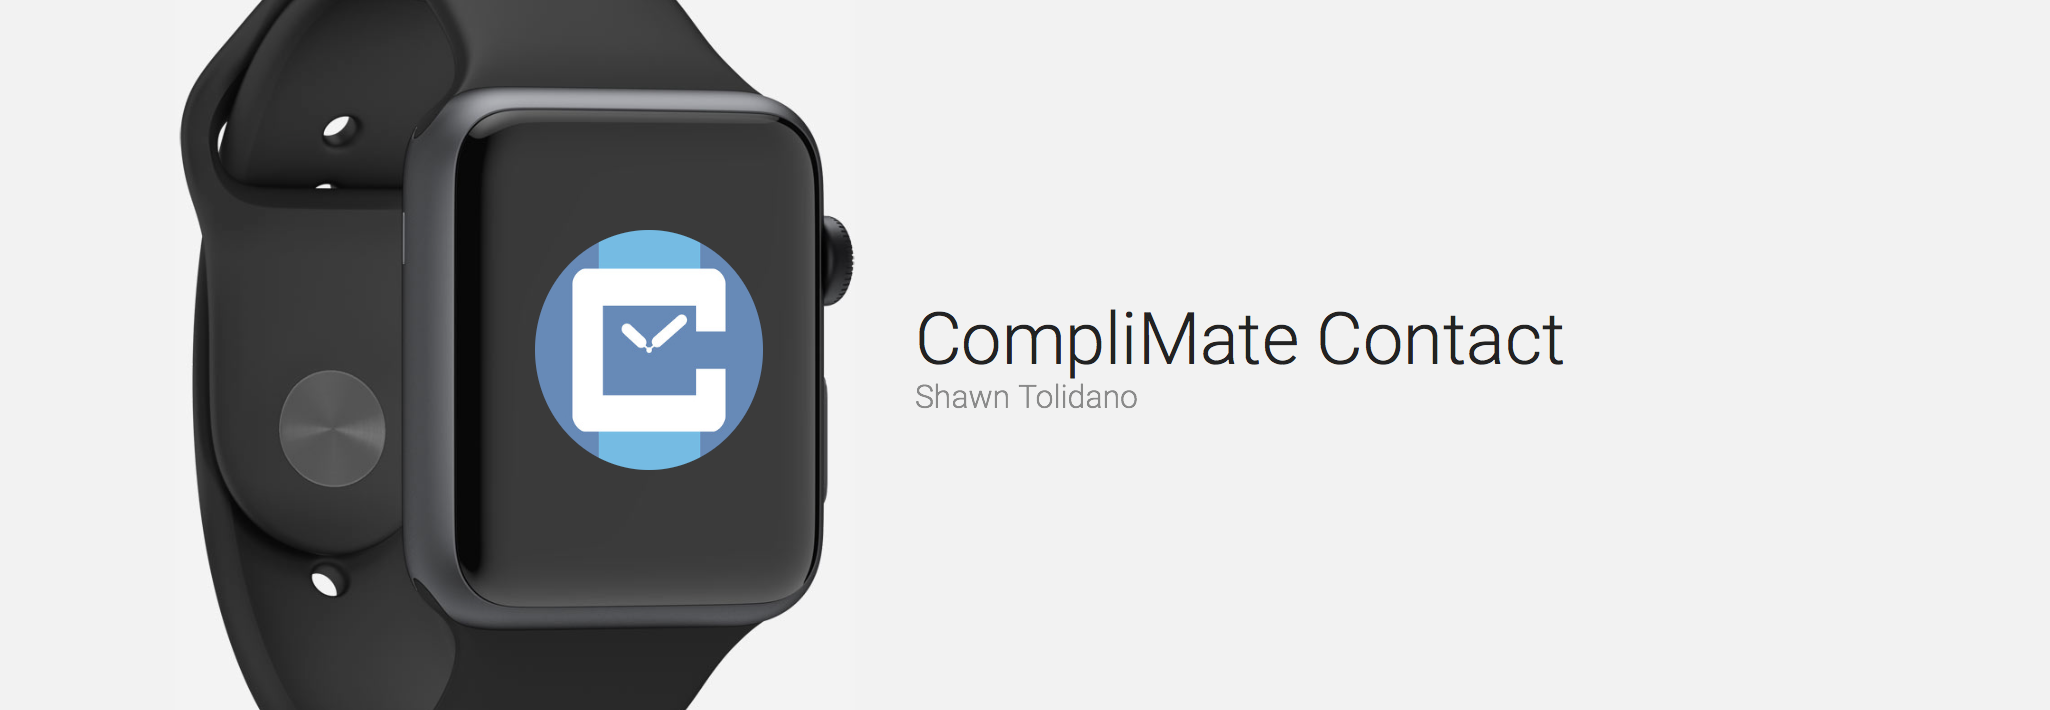 Keep Your Primary Contact Close With the CompliMate Contact Complication